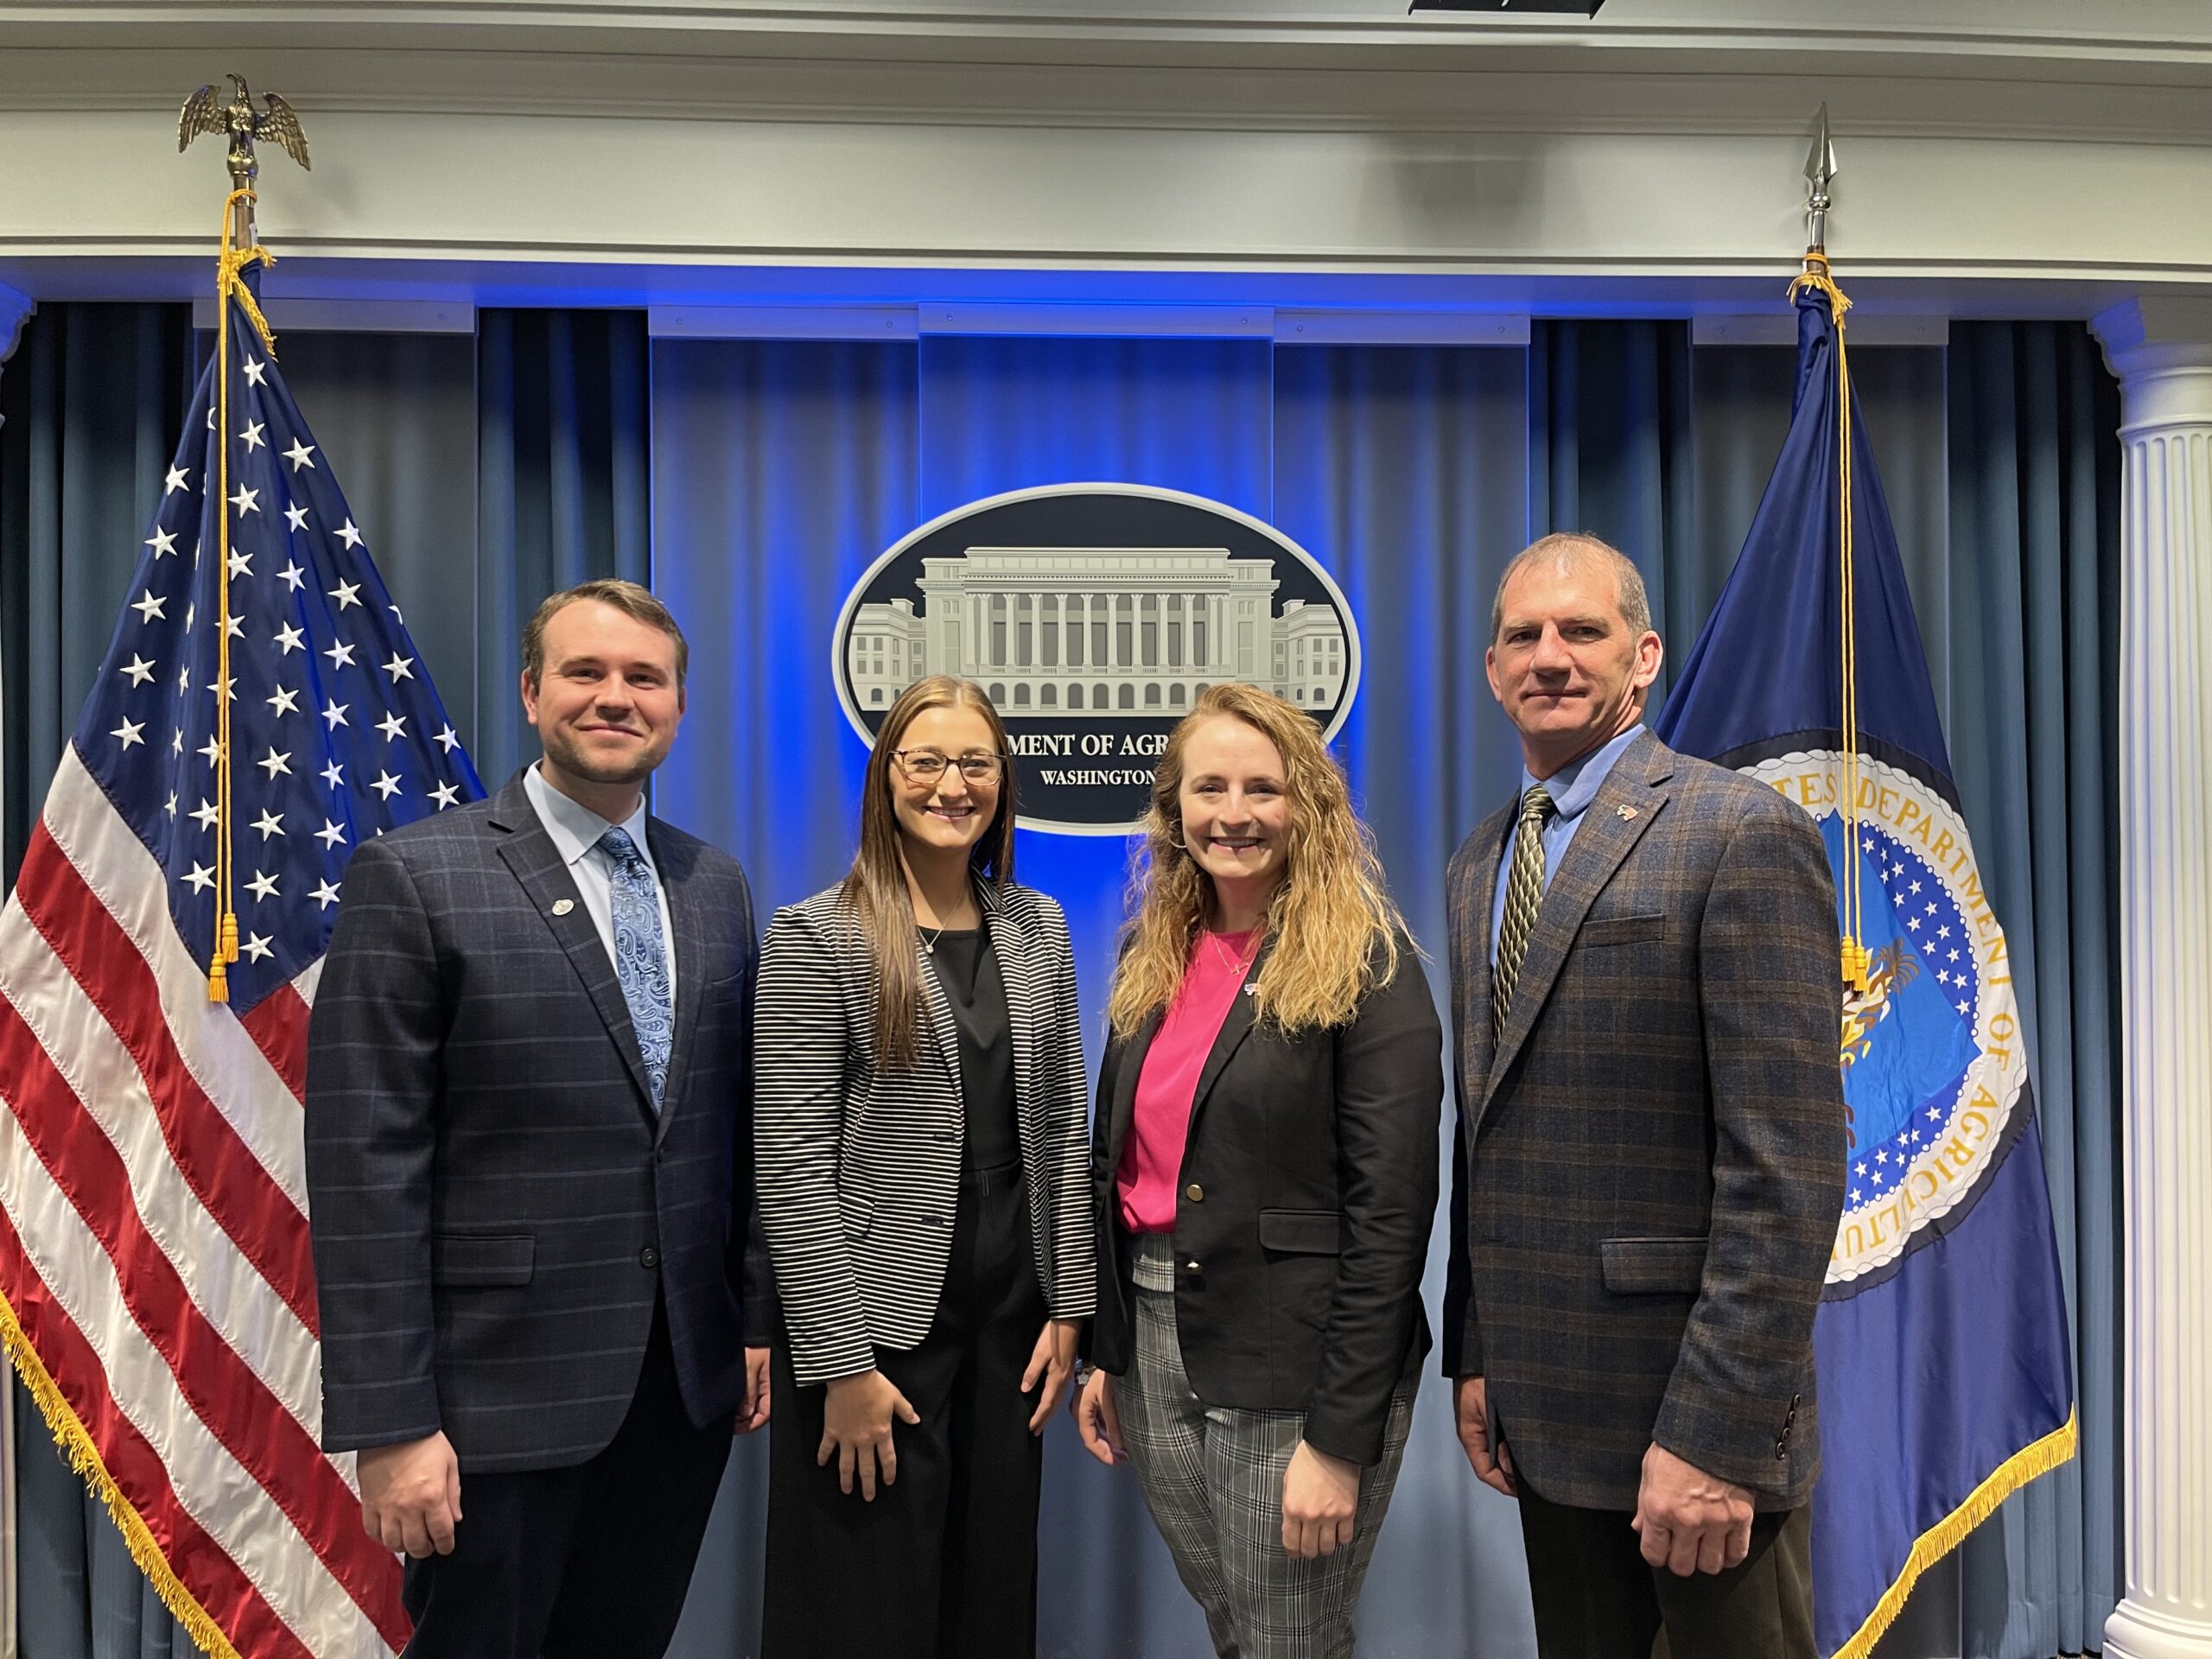 Left to right: NPPC’s Regional Director of Producer Services, Josh Scramlin, Communications Intern, Grace Howe, Manager of Marketing and Digital Communications, Mikayla Dolch, and President and pork producer from Missouri, Scott Hays, at USDA.